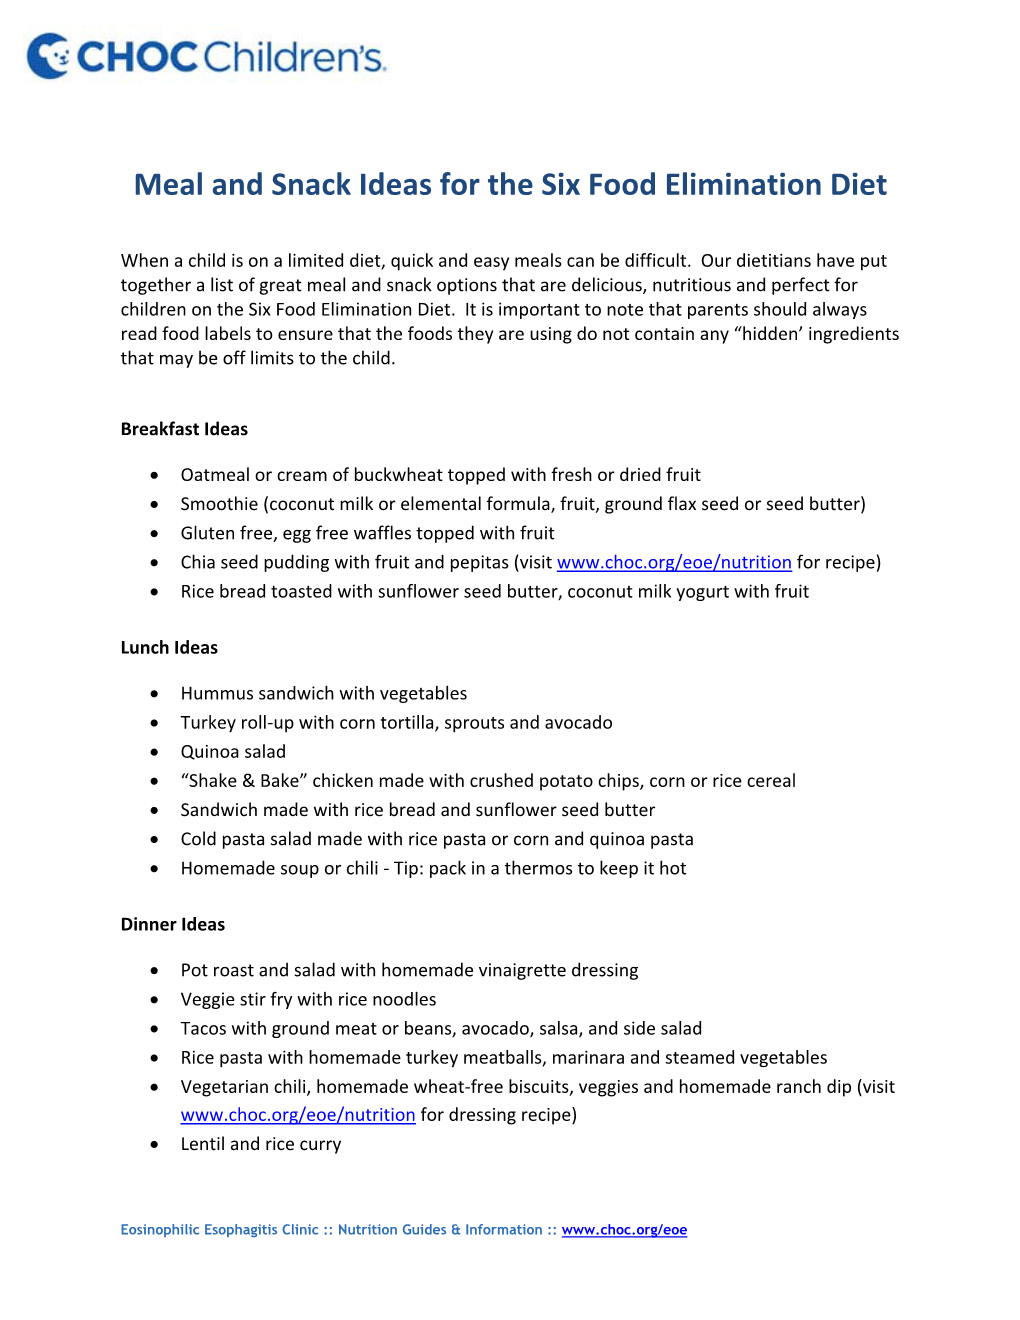 Meal and Snack Ideas for the Six Food Elimination Diet